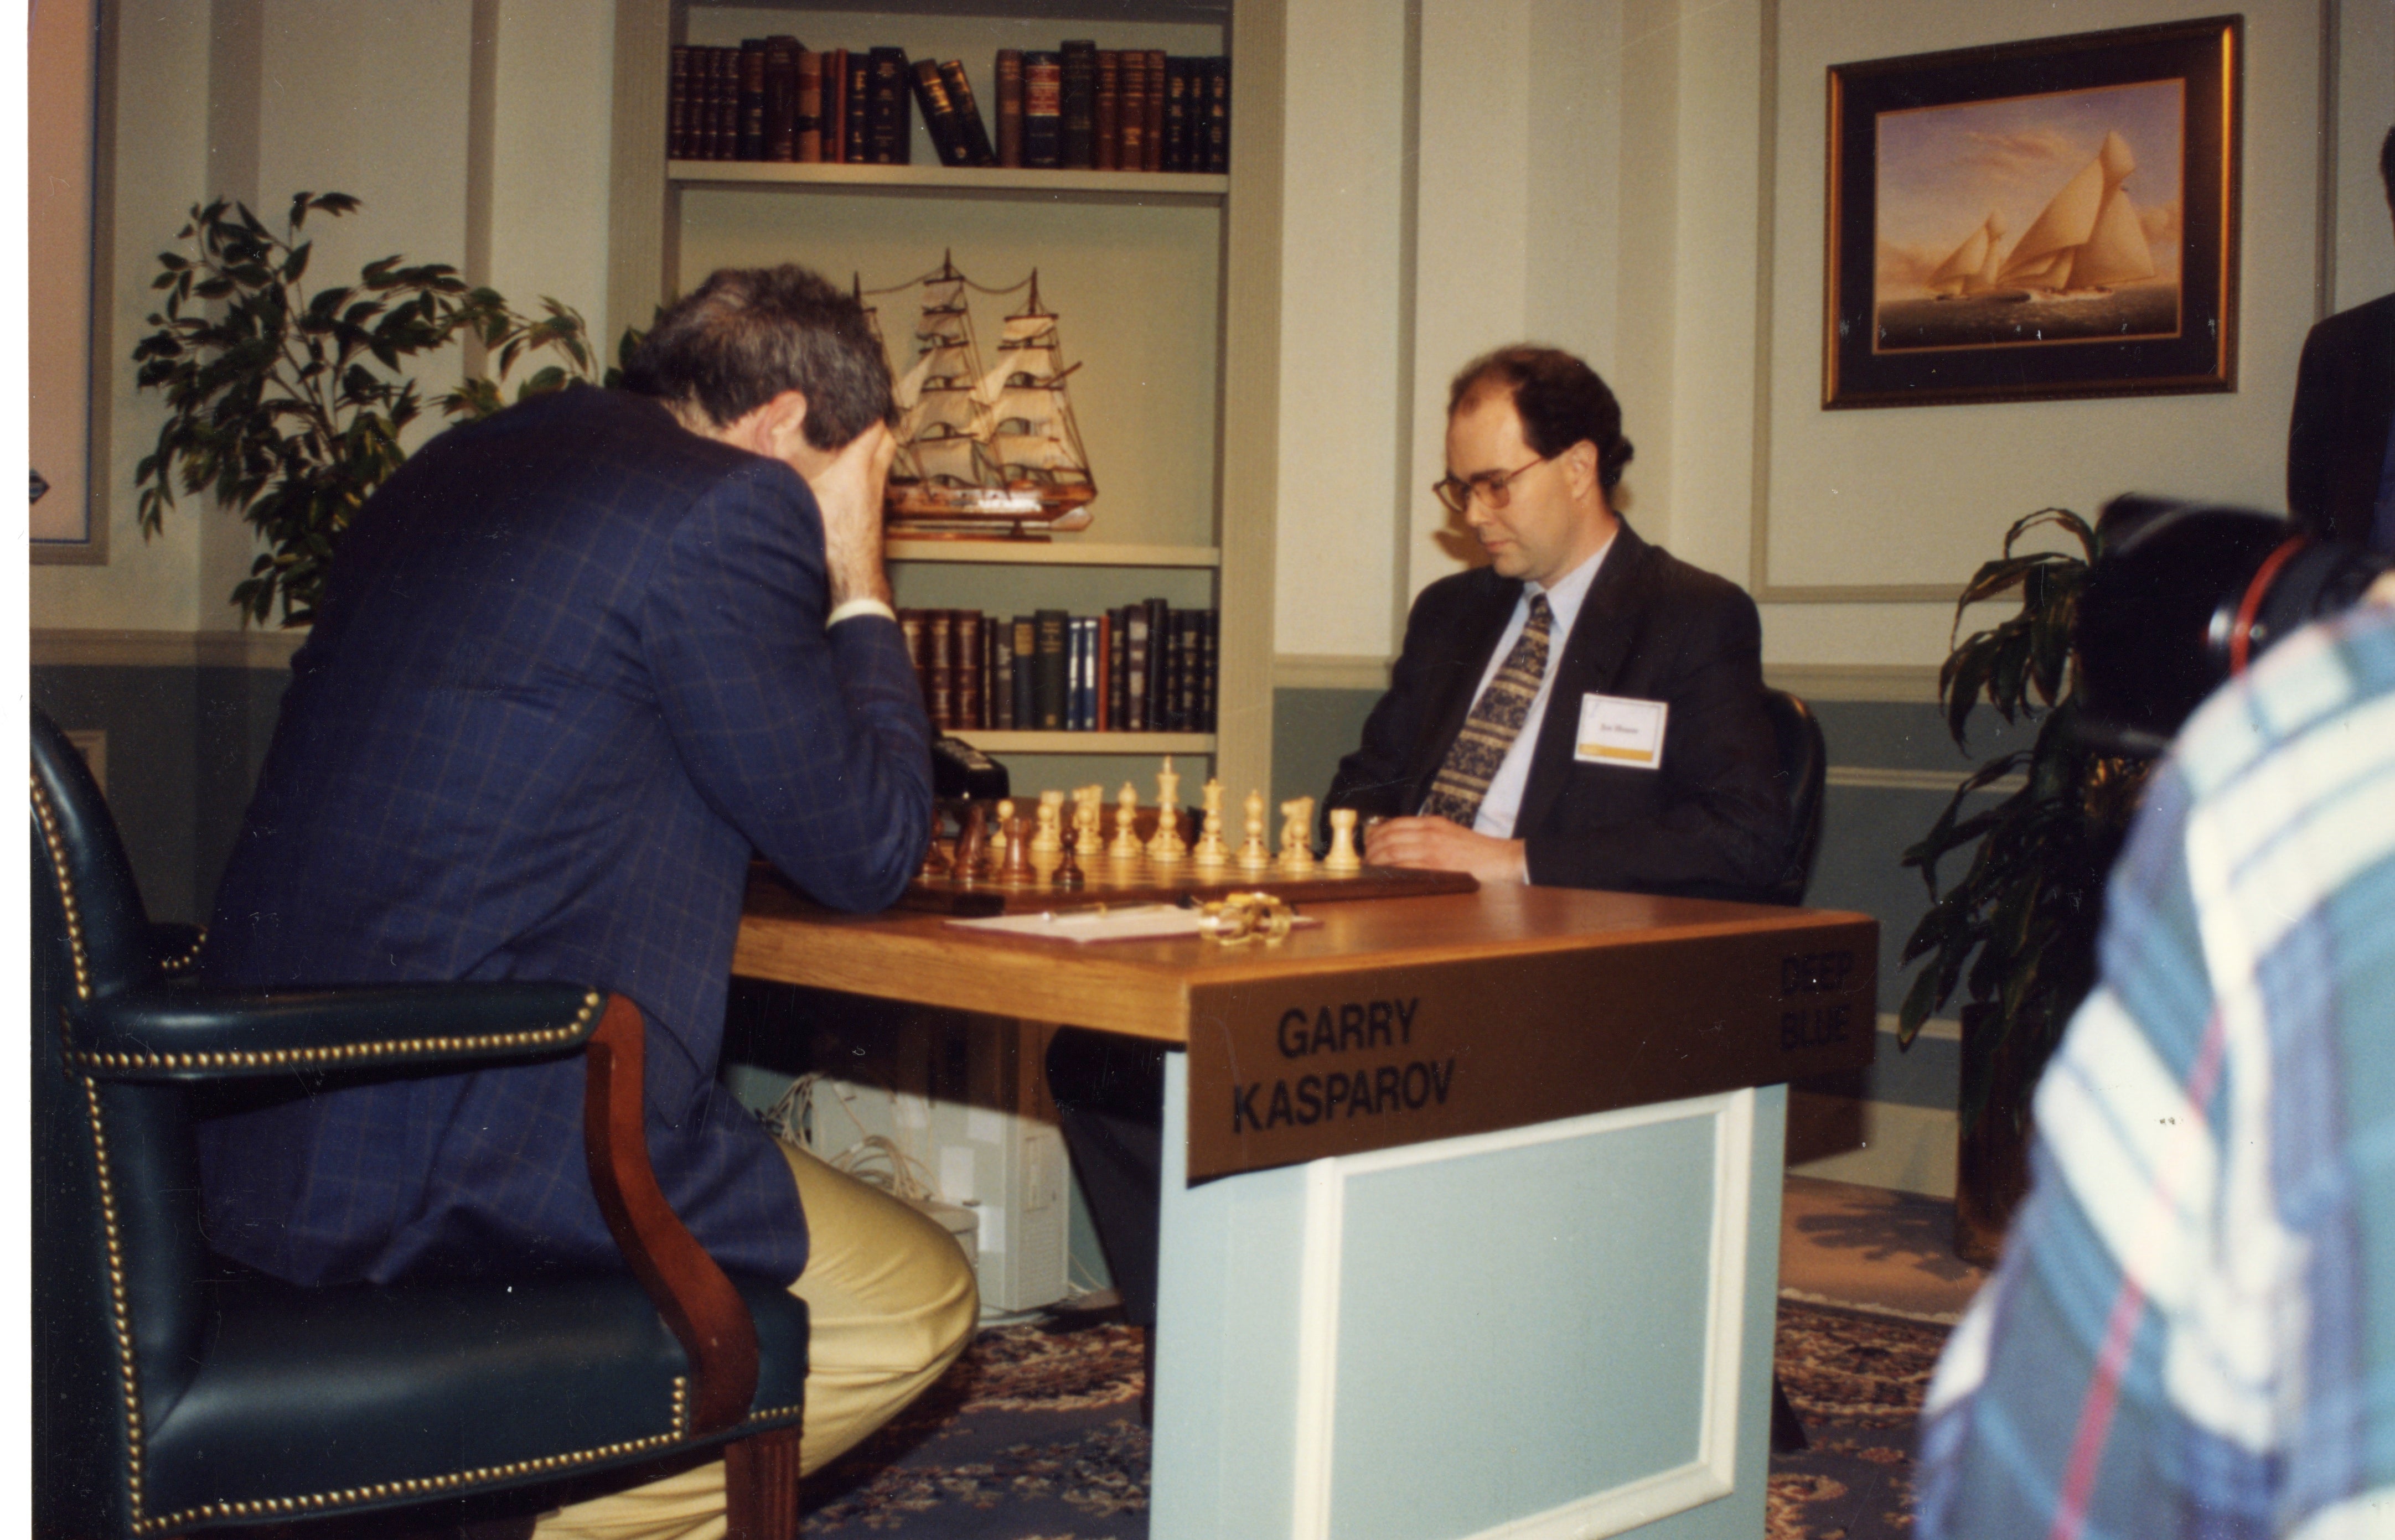 As the games wore on, the pressure had a visible effect on Kasparov. (Photo: Courtesy of IBM)